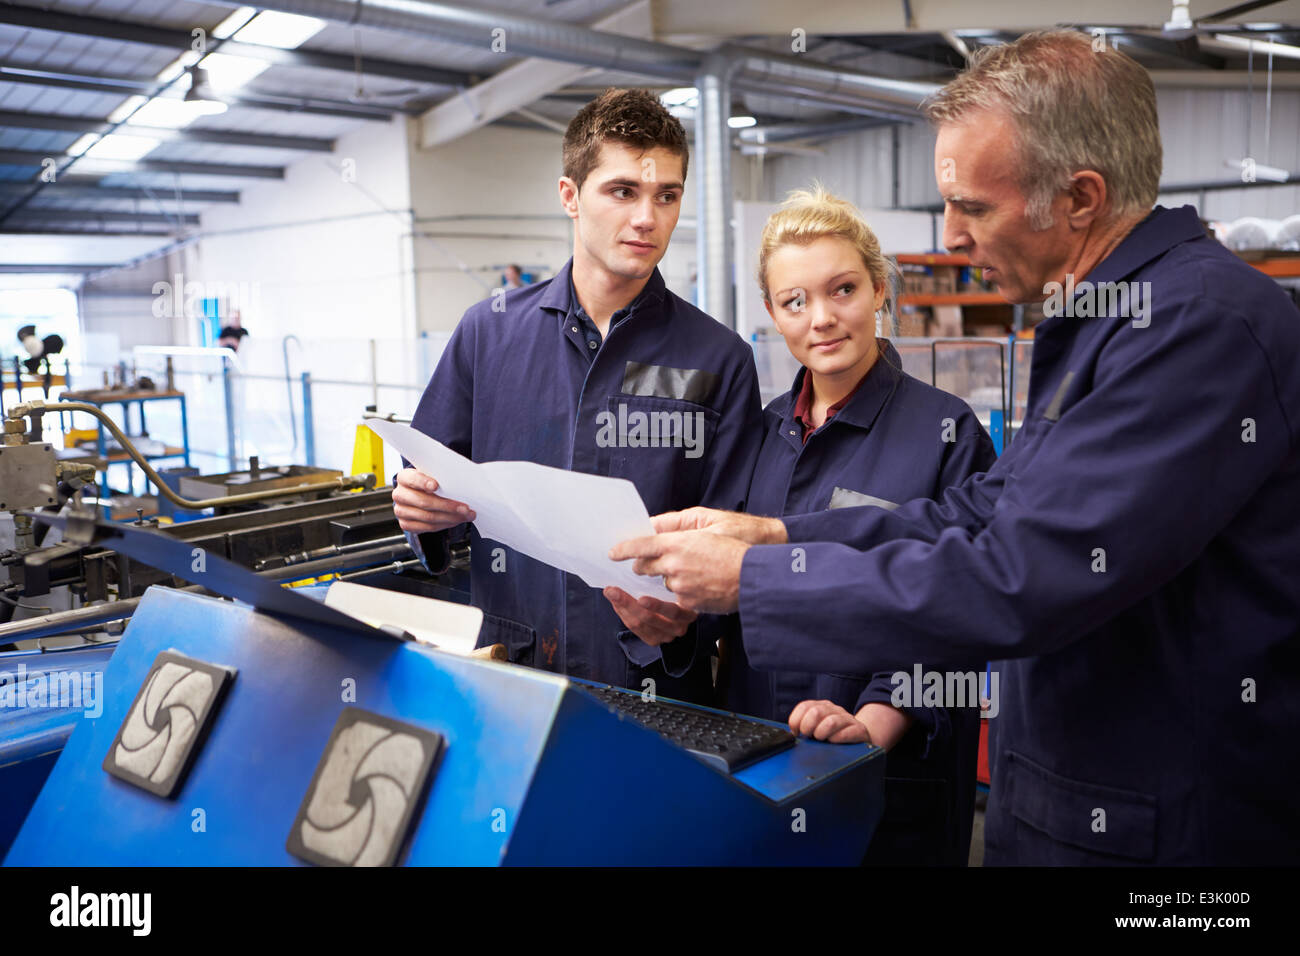 Engineer Teaching Apprentices To Use Tube Bending Machine Stock Photo